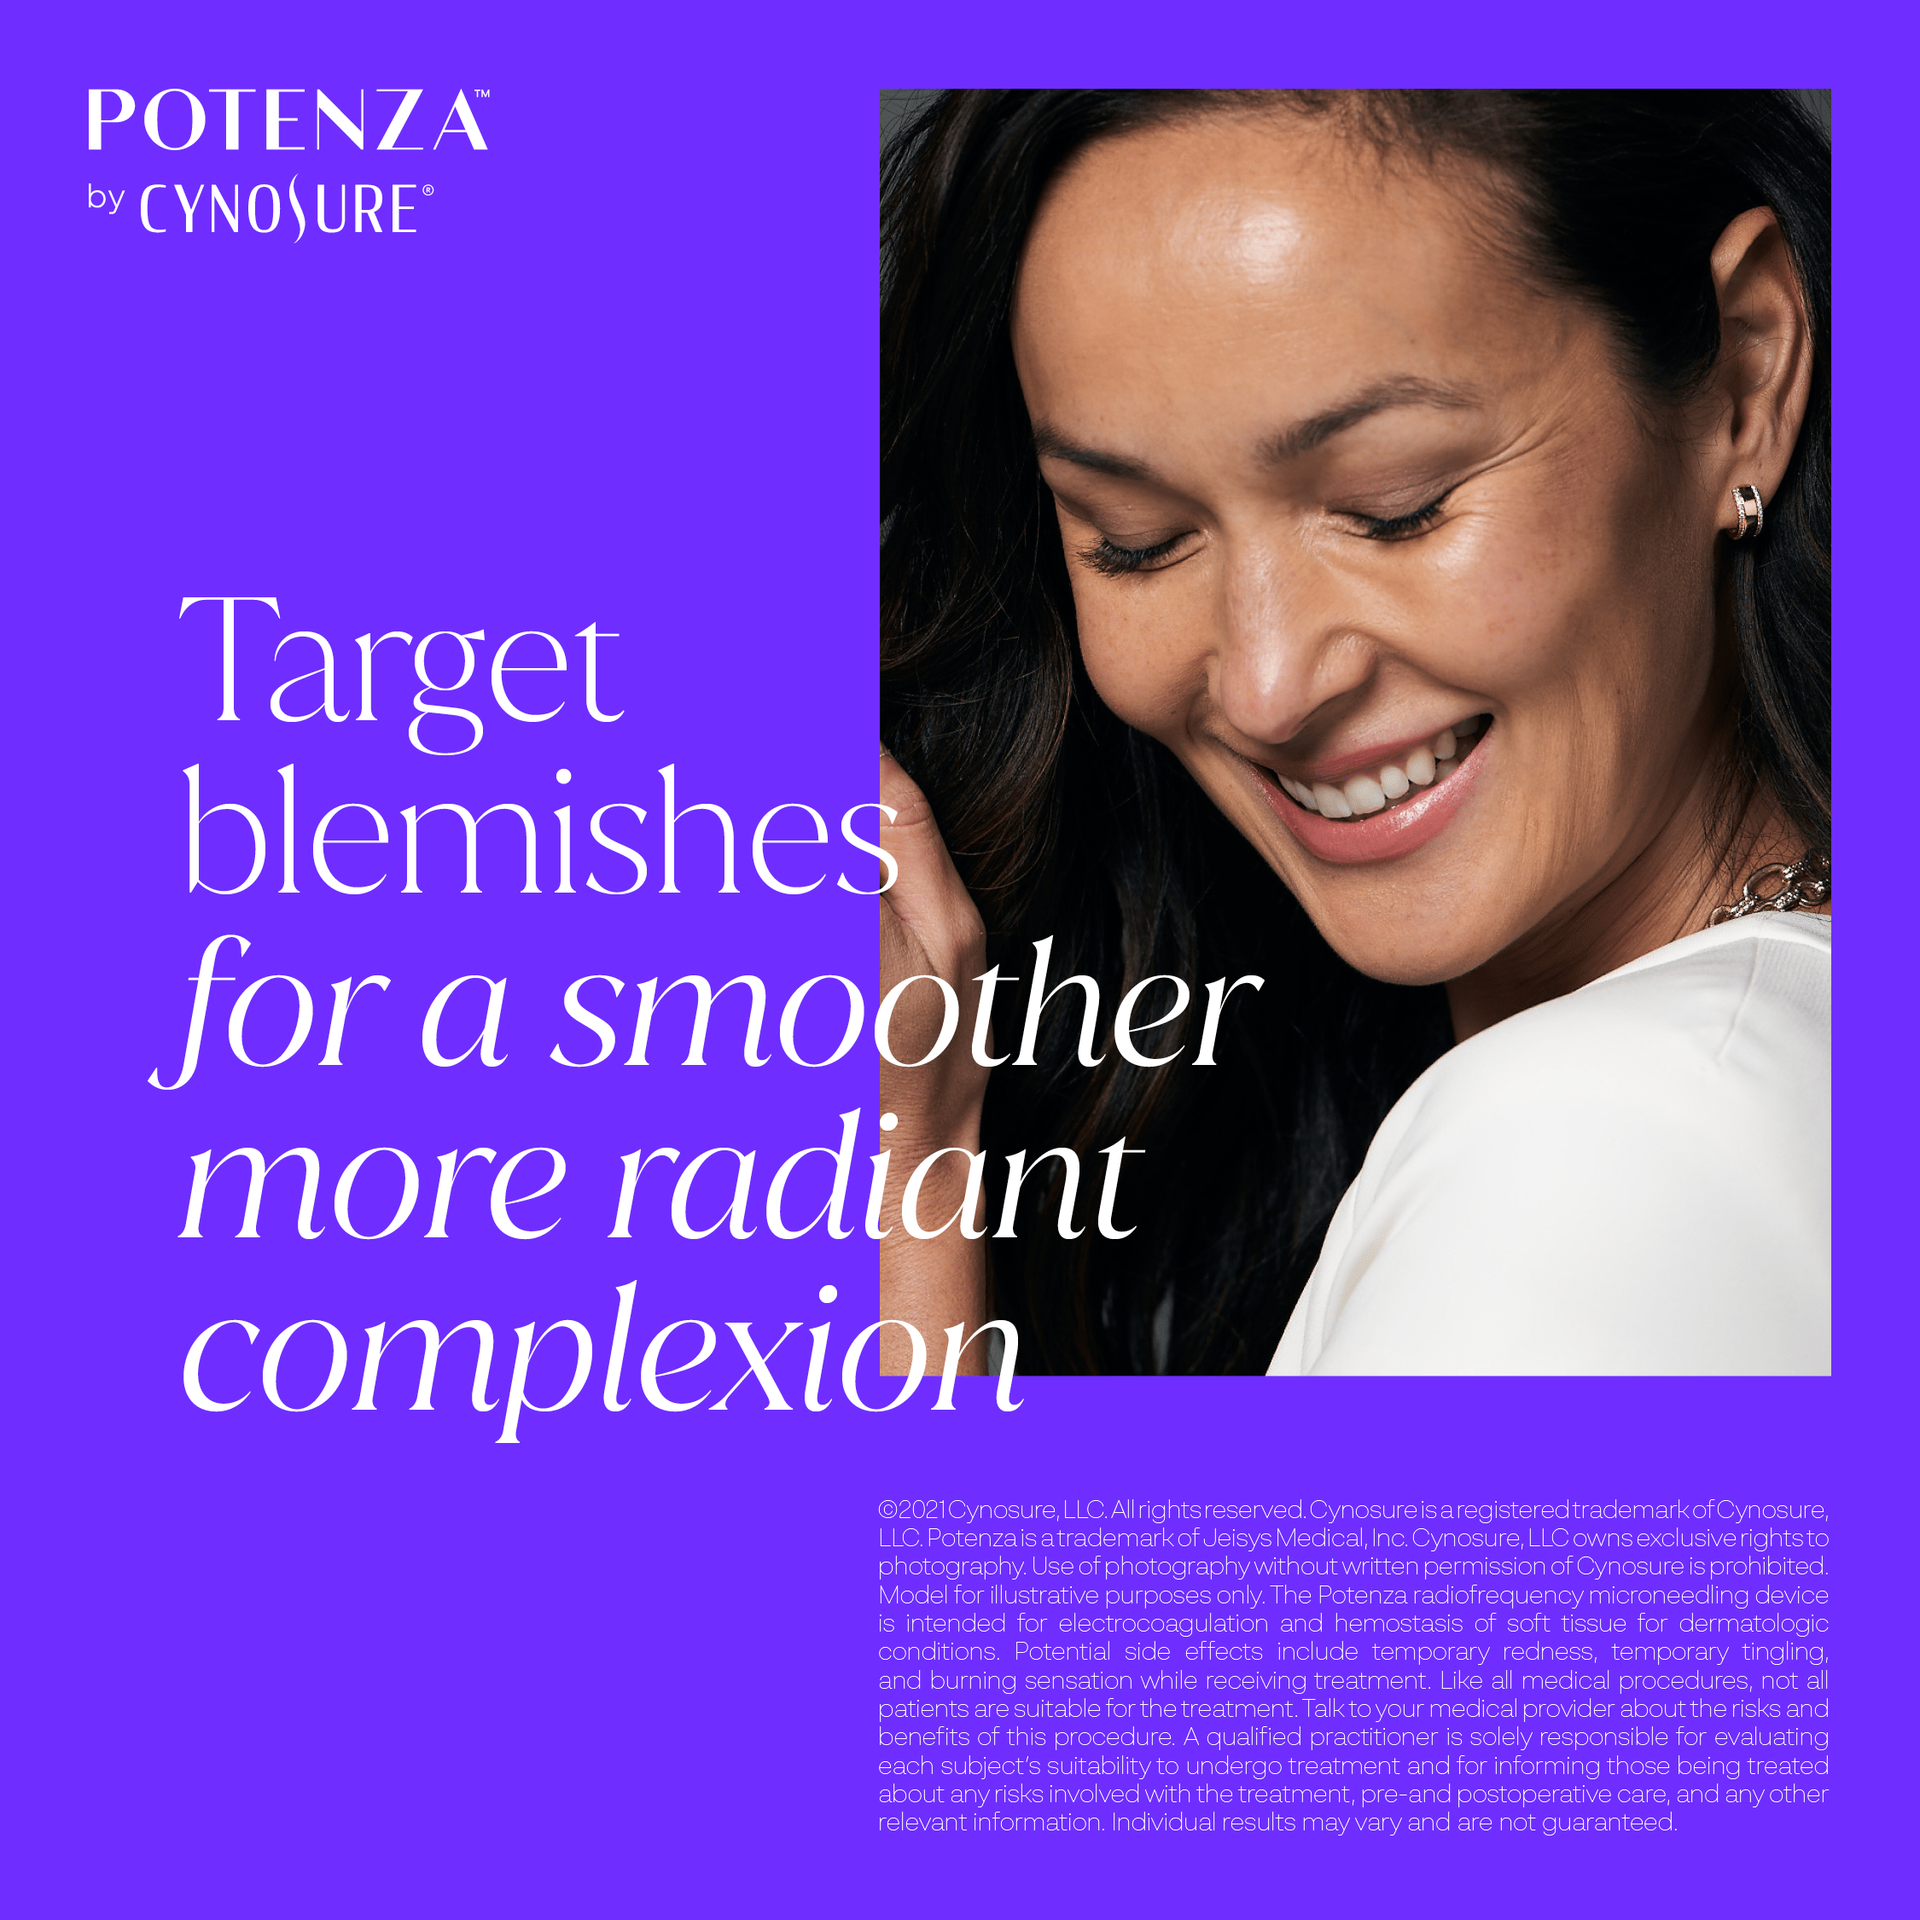 A woman is smiling on a purple background that says target blemishes for a smoother more radiant complexion